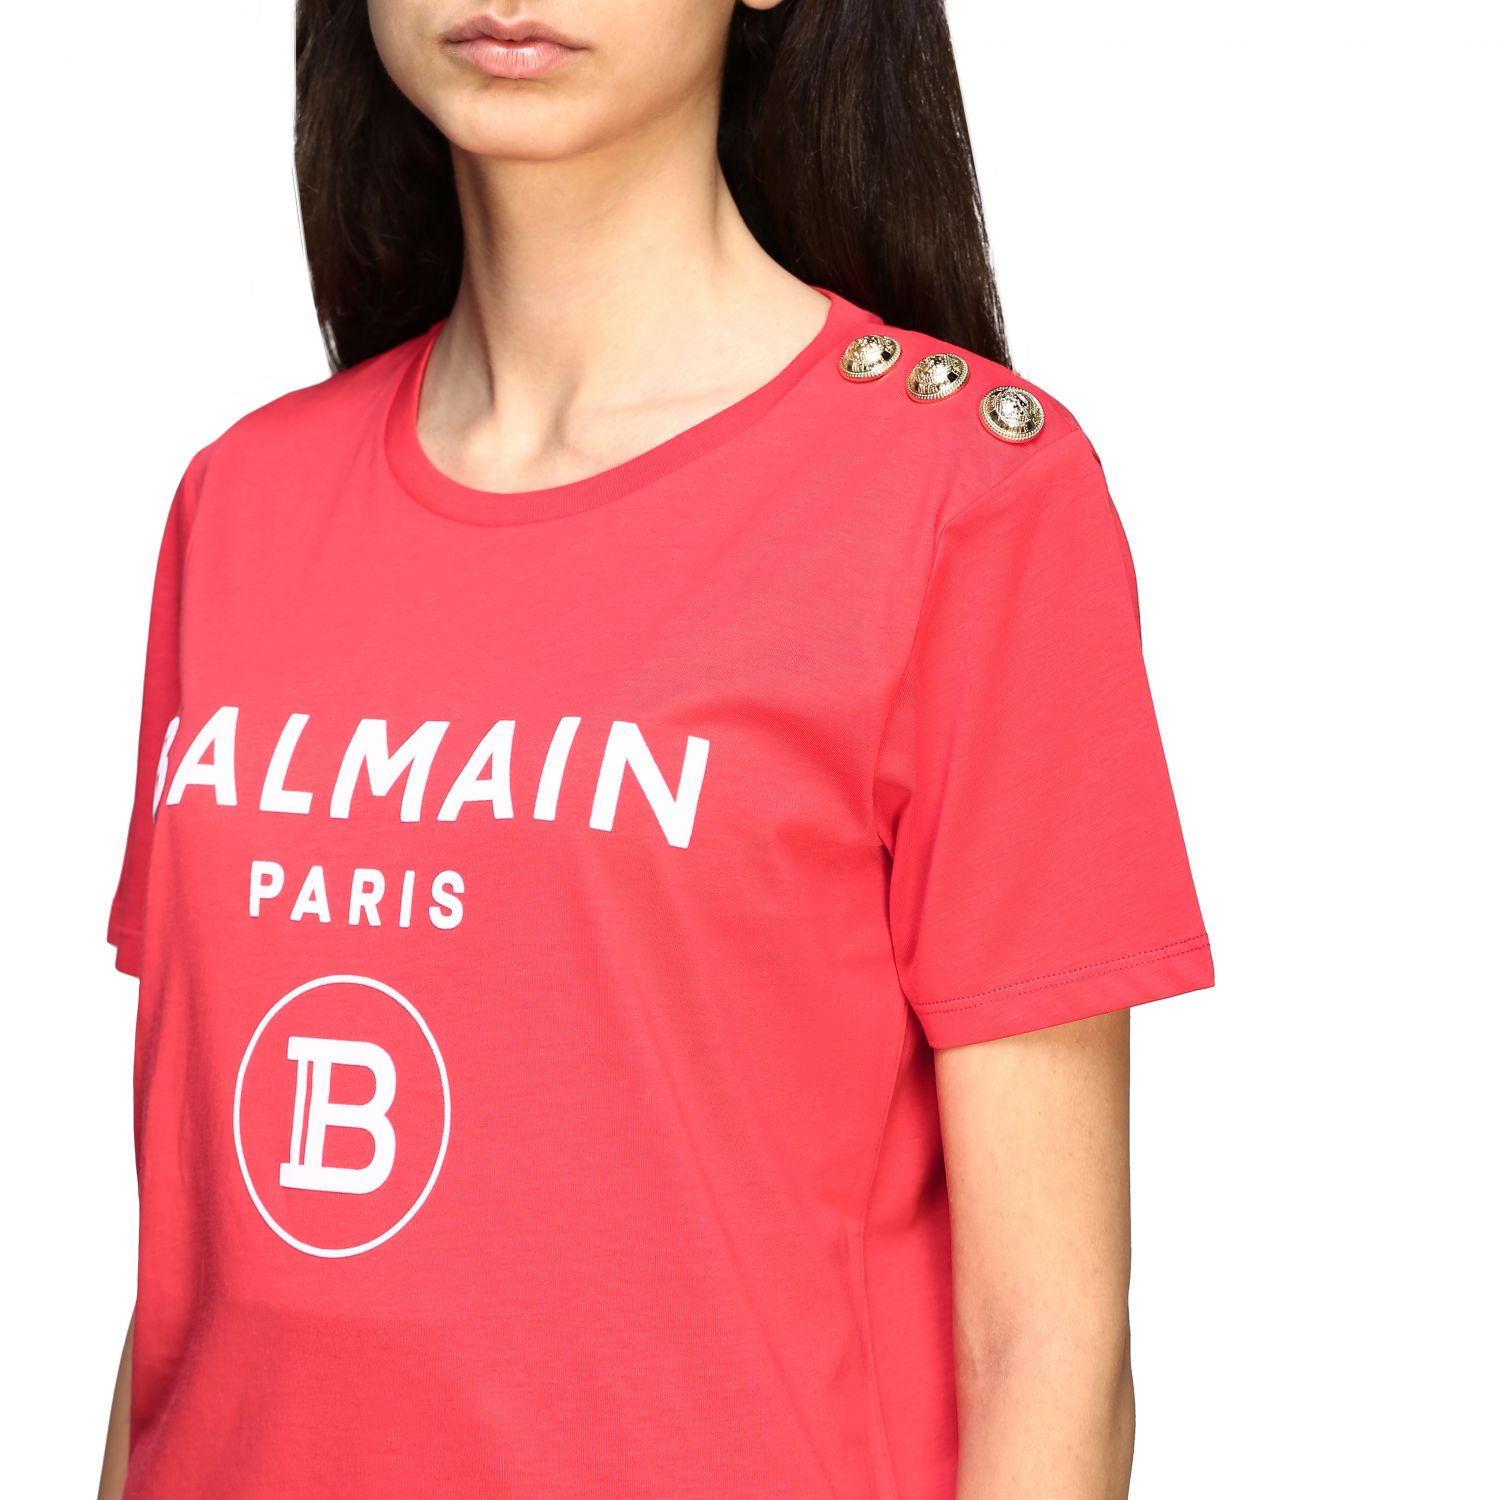 Balmain Outlet: T-shirt with jewel buttons on the shoulder | T-Shirt ...